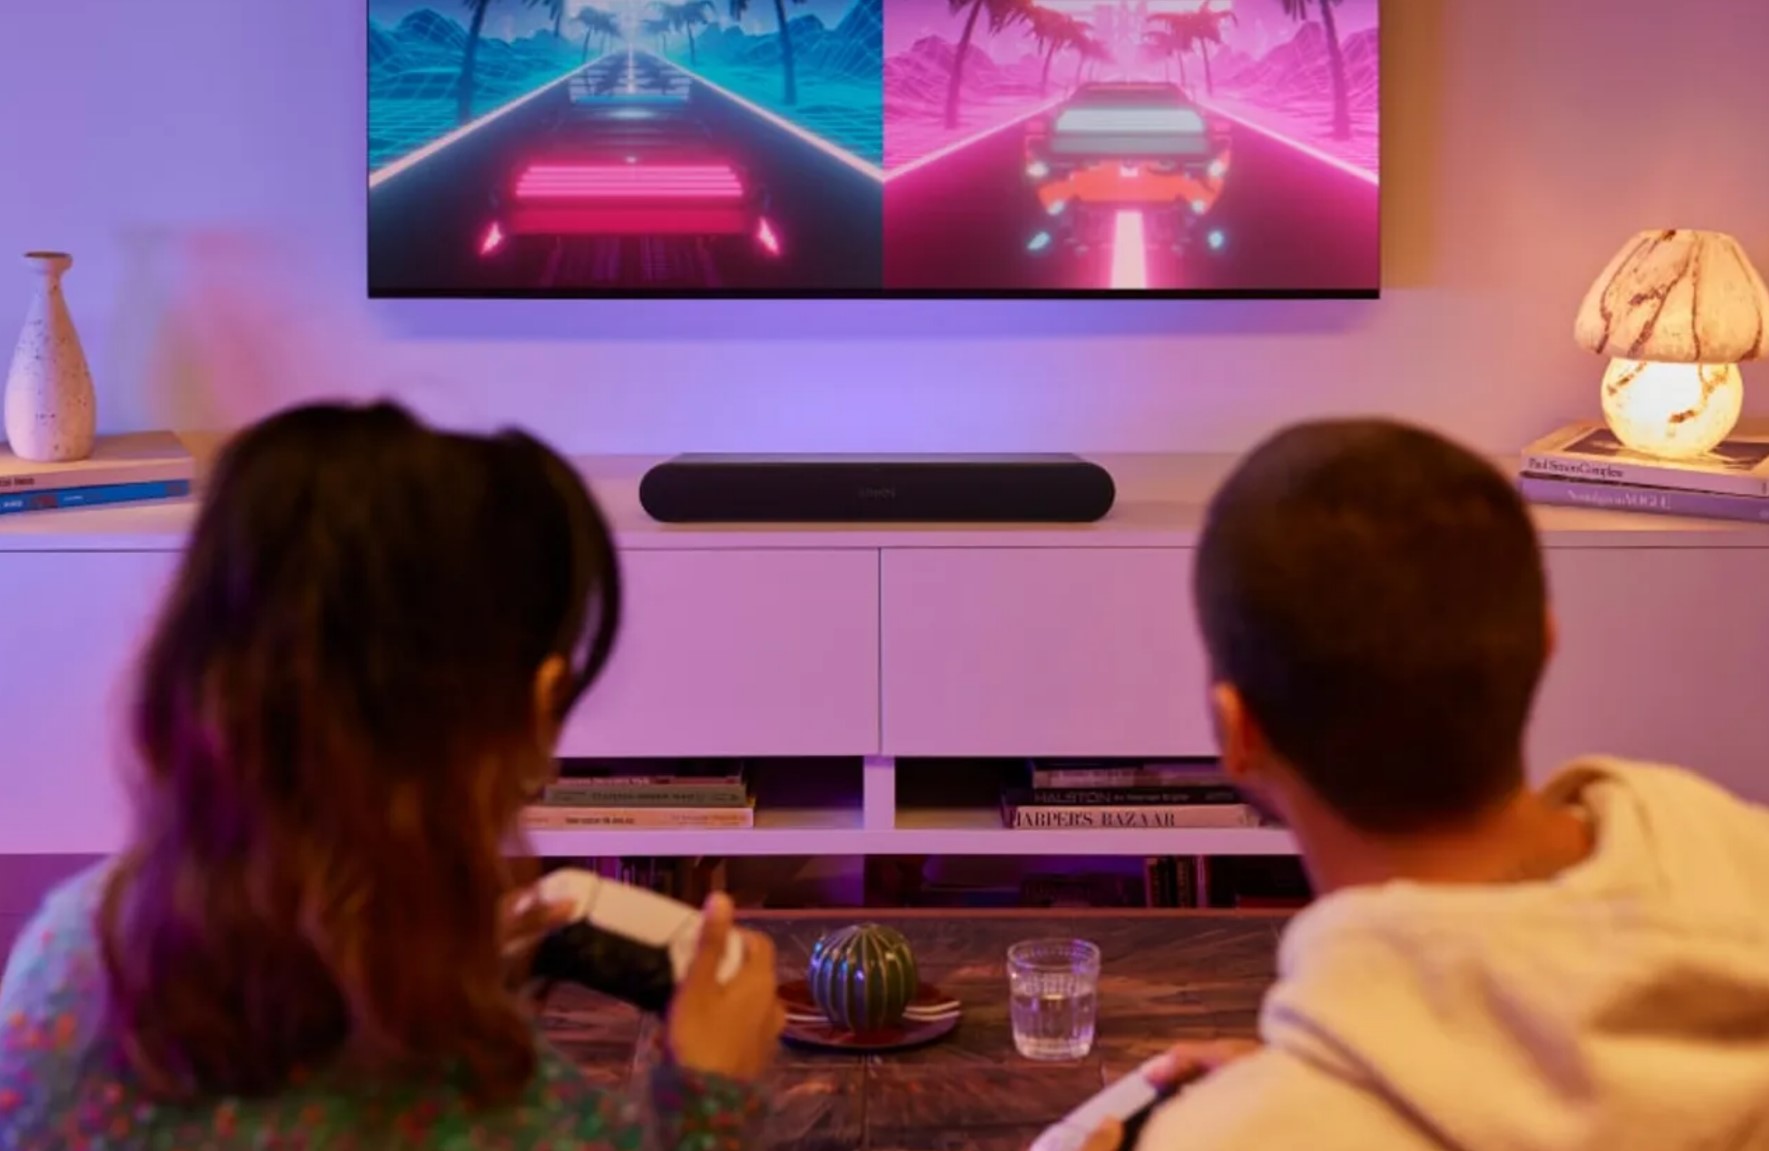 Sonos Ray 3.0 soundbar at $399 will blow you away (first look)